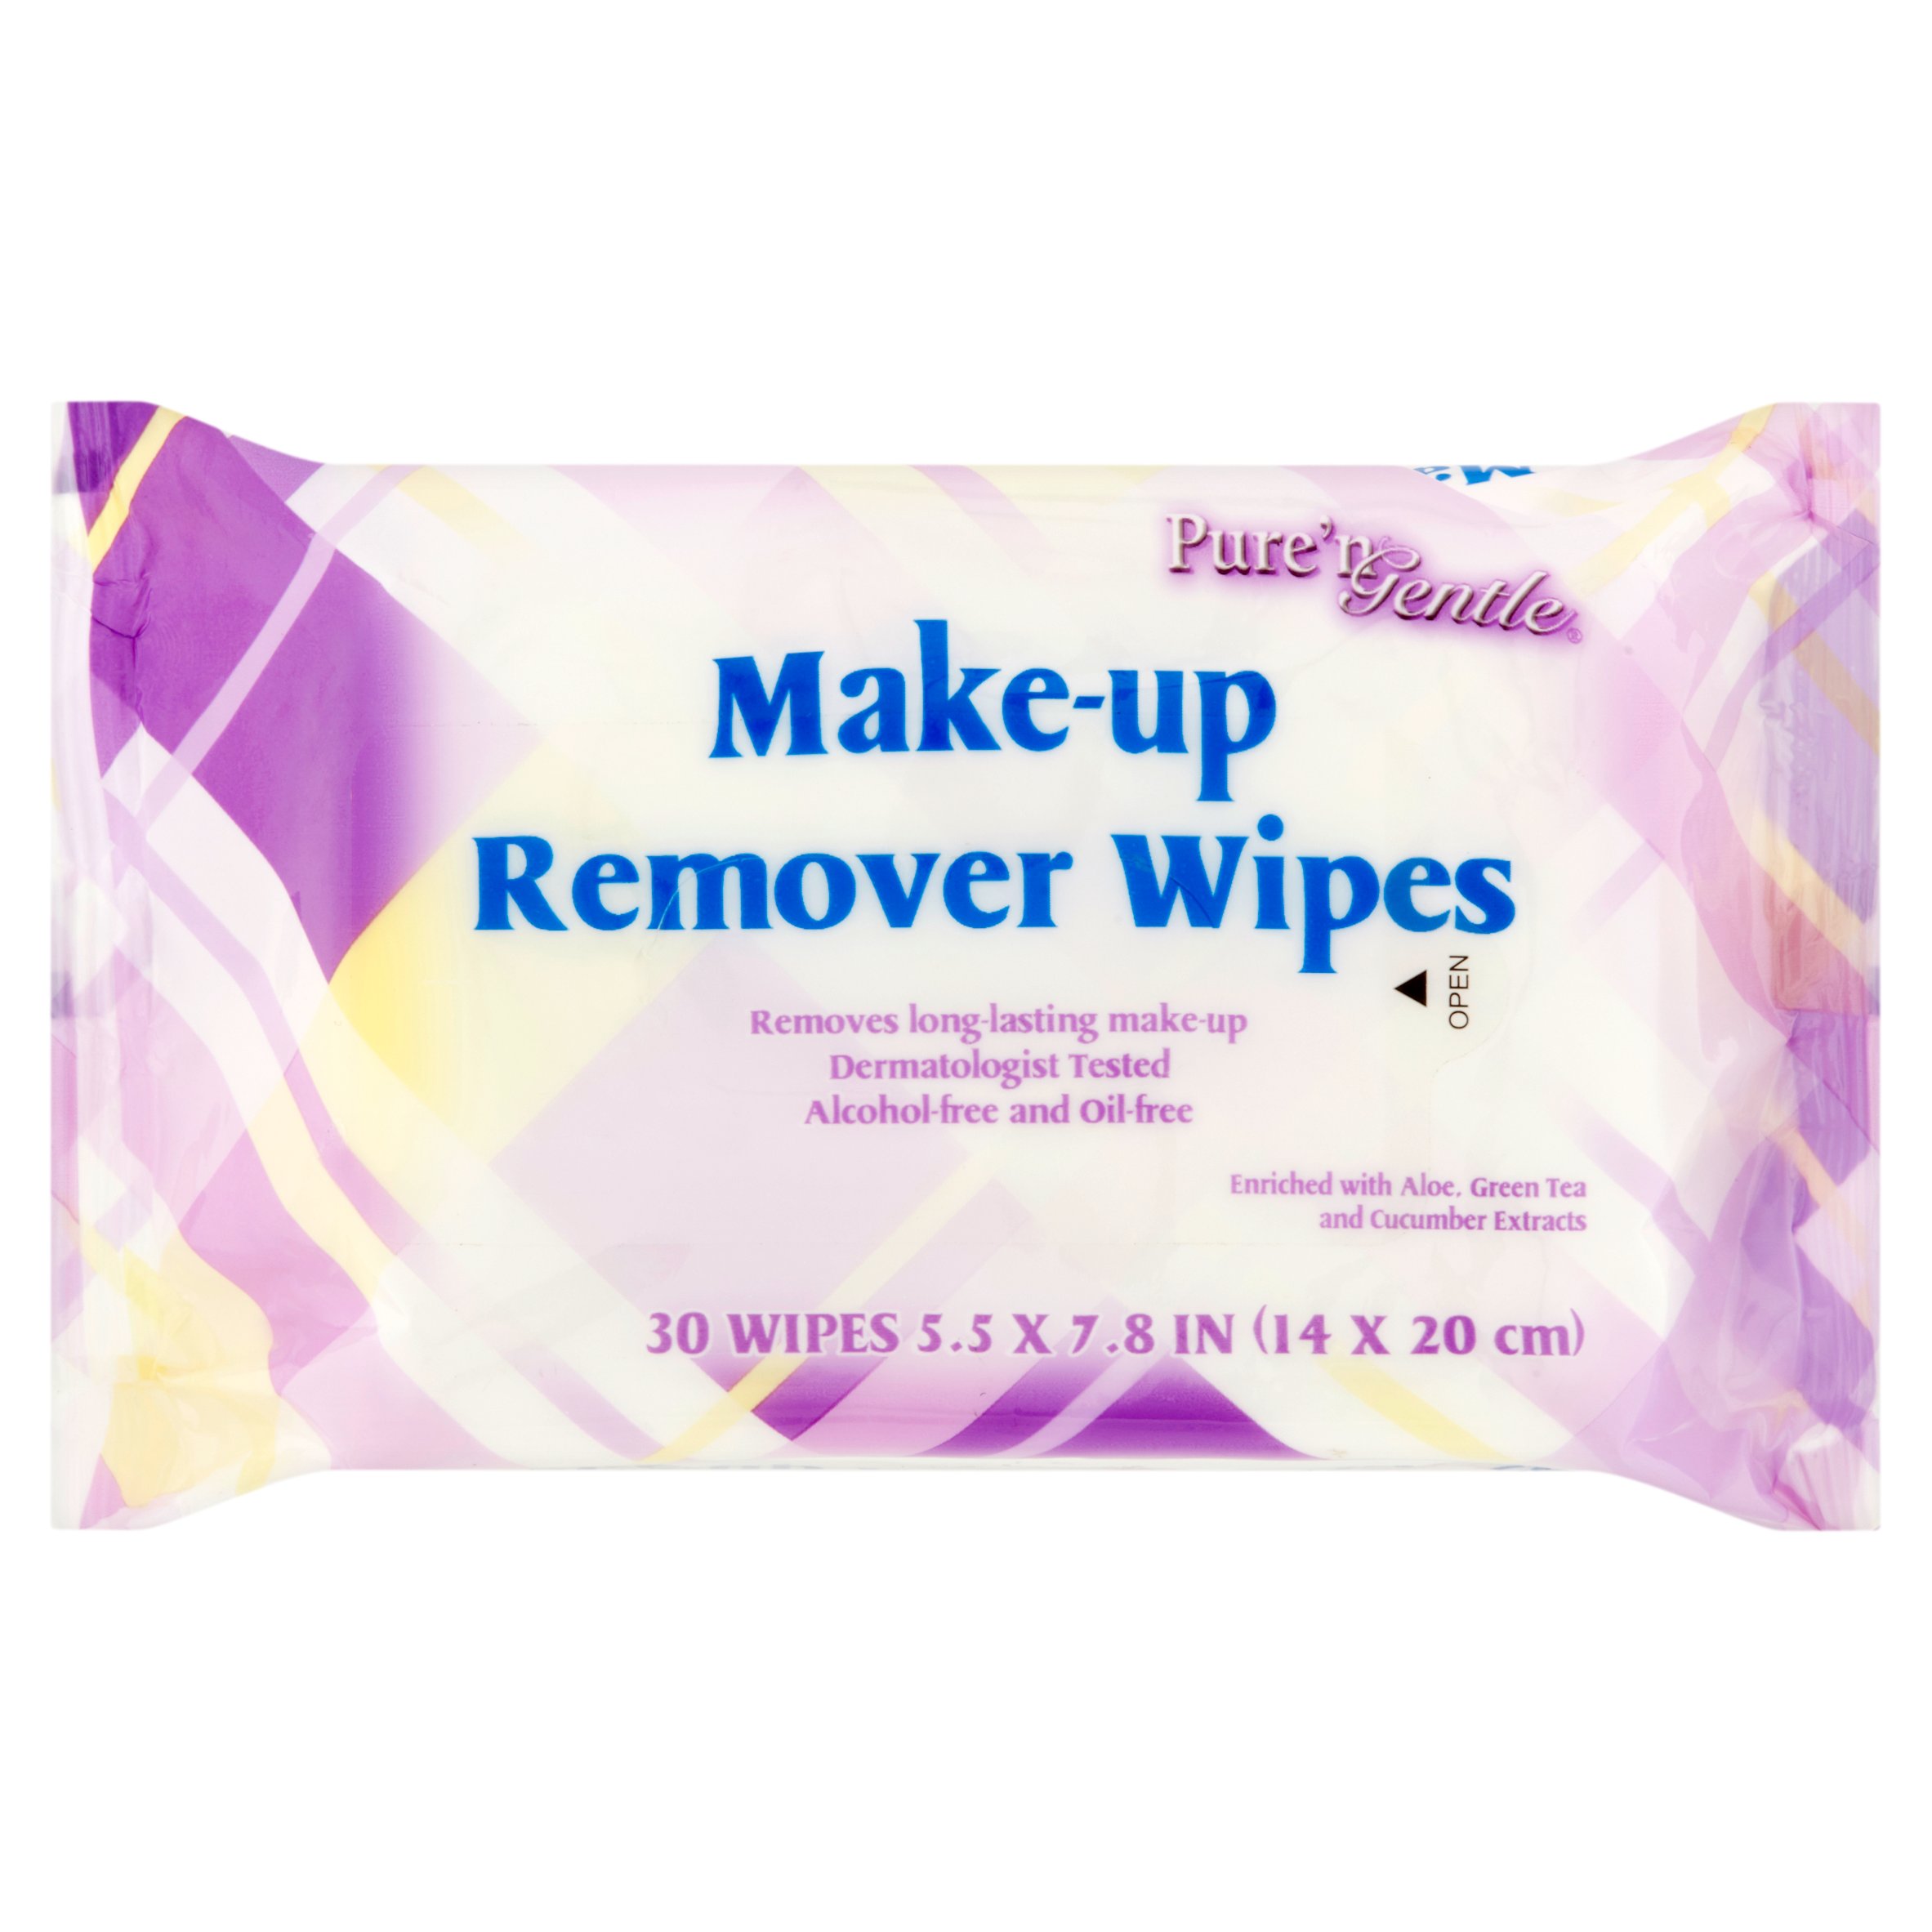 Pure'n Gentle Make-up Remover Wipes, 30 Count - image 1 of 4